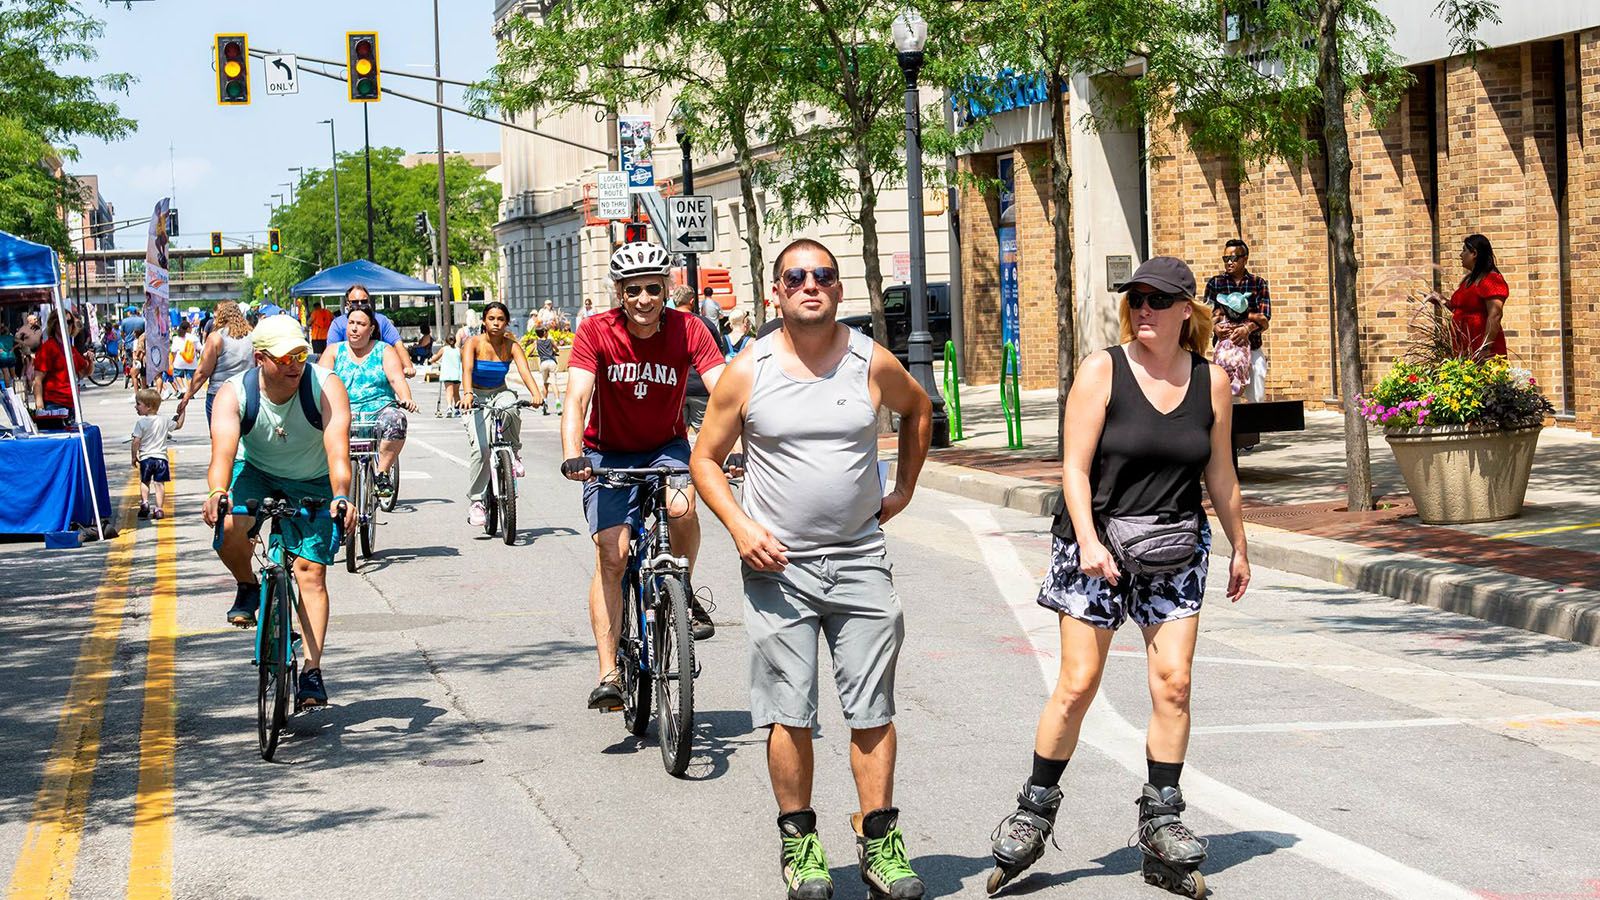 Open Streets returns downtown on Sunday, Aug. 18.